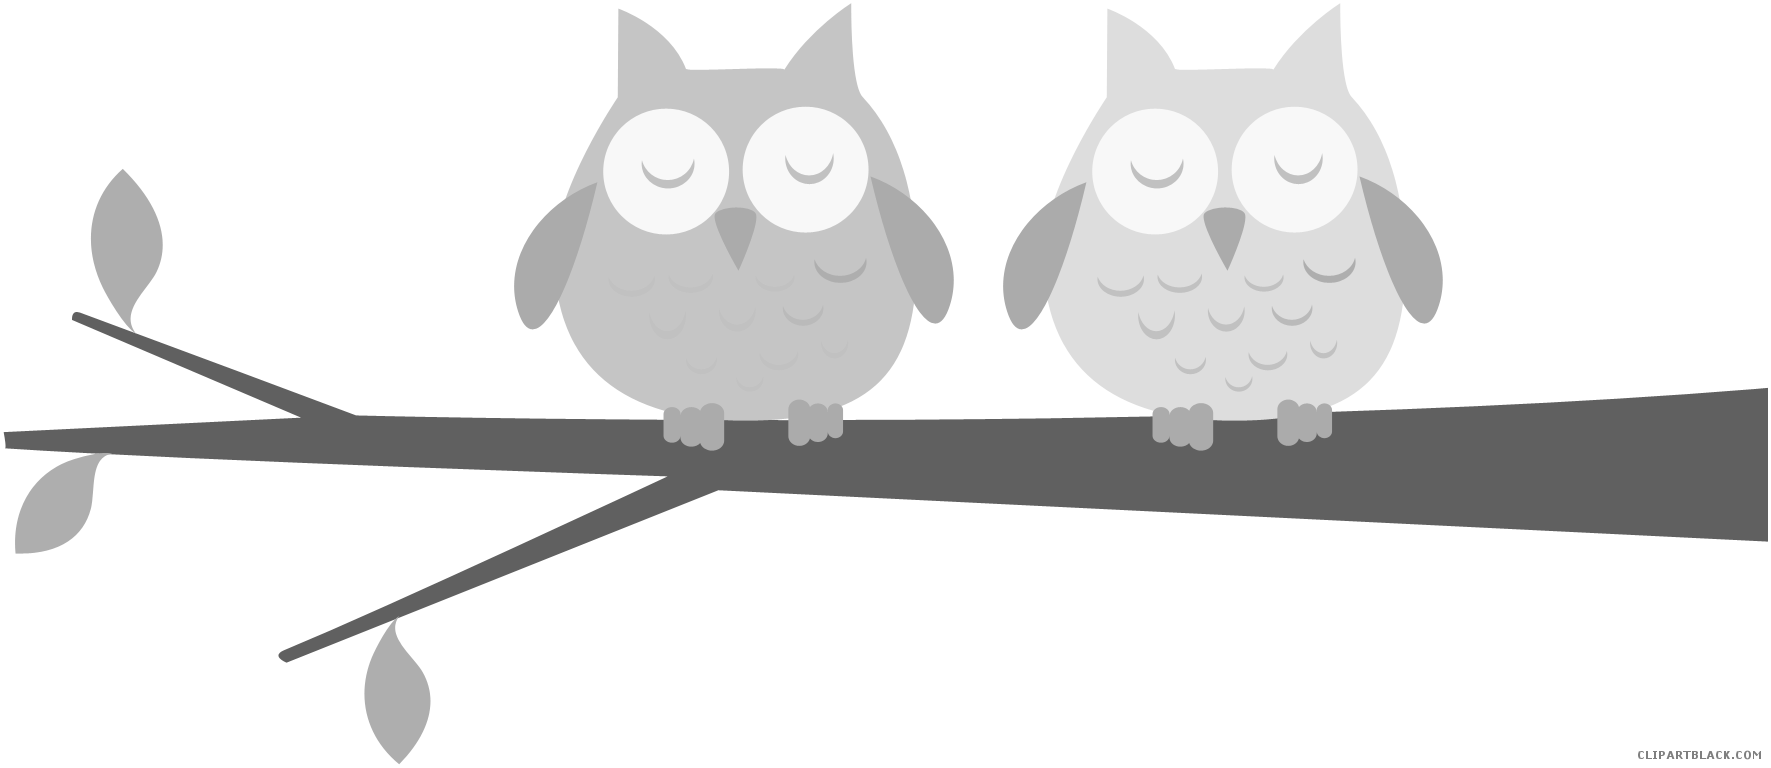 Awesome Owl Animal Free Black White Clipart Images - Owl On A Branch Clipart (1771x768)